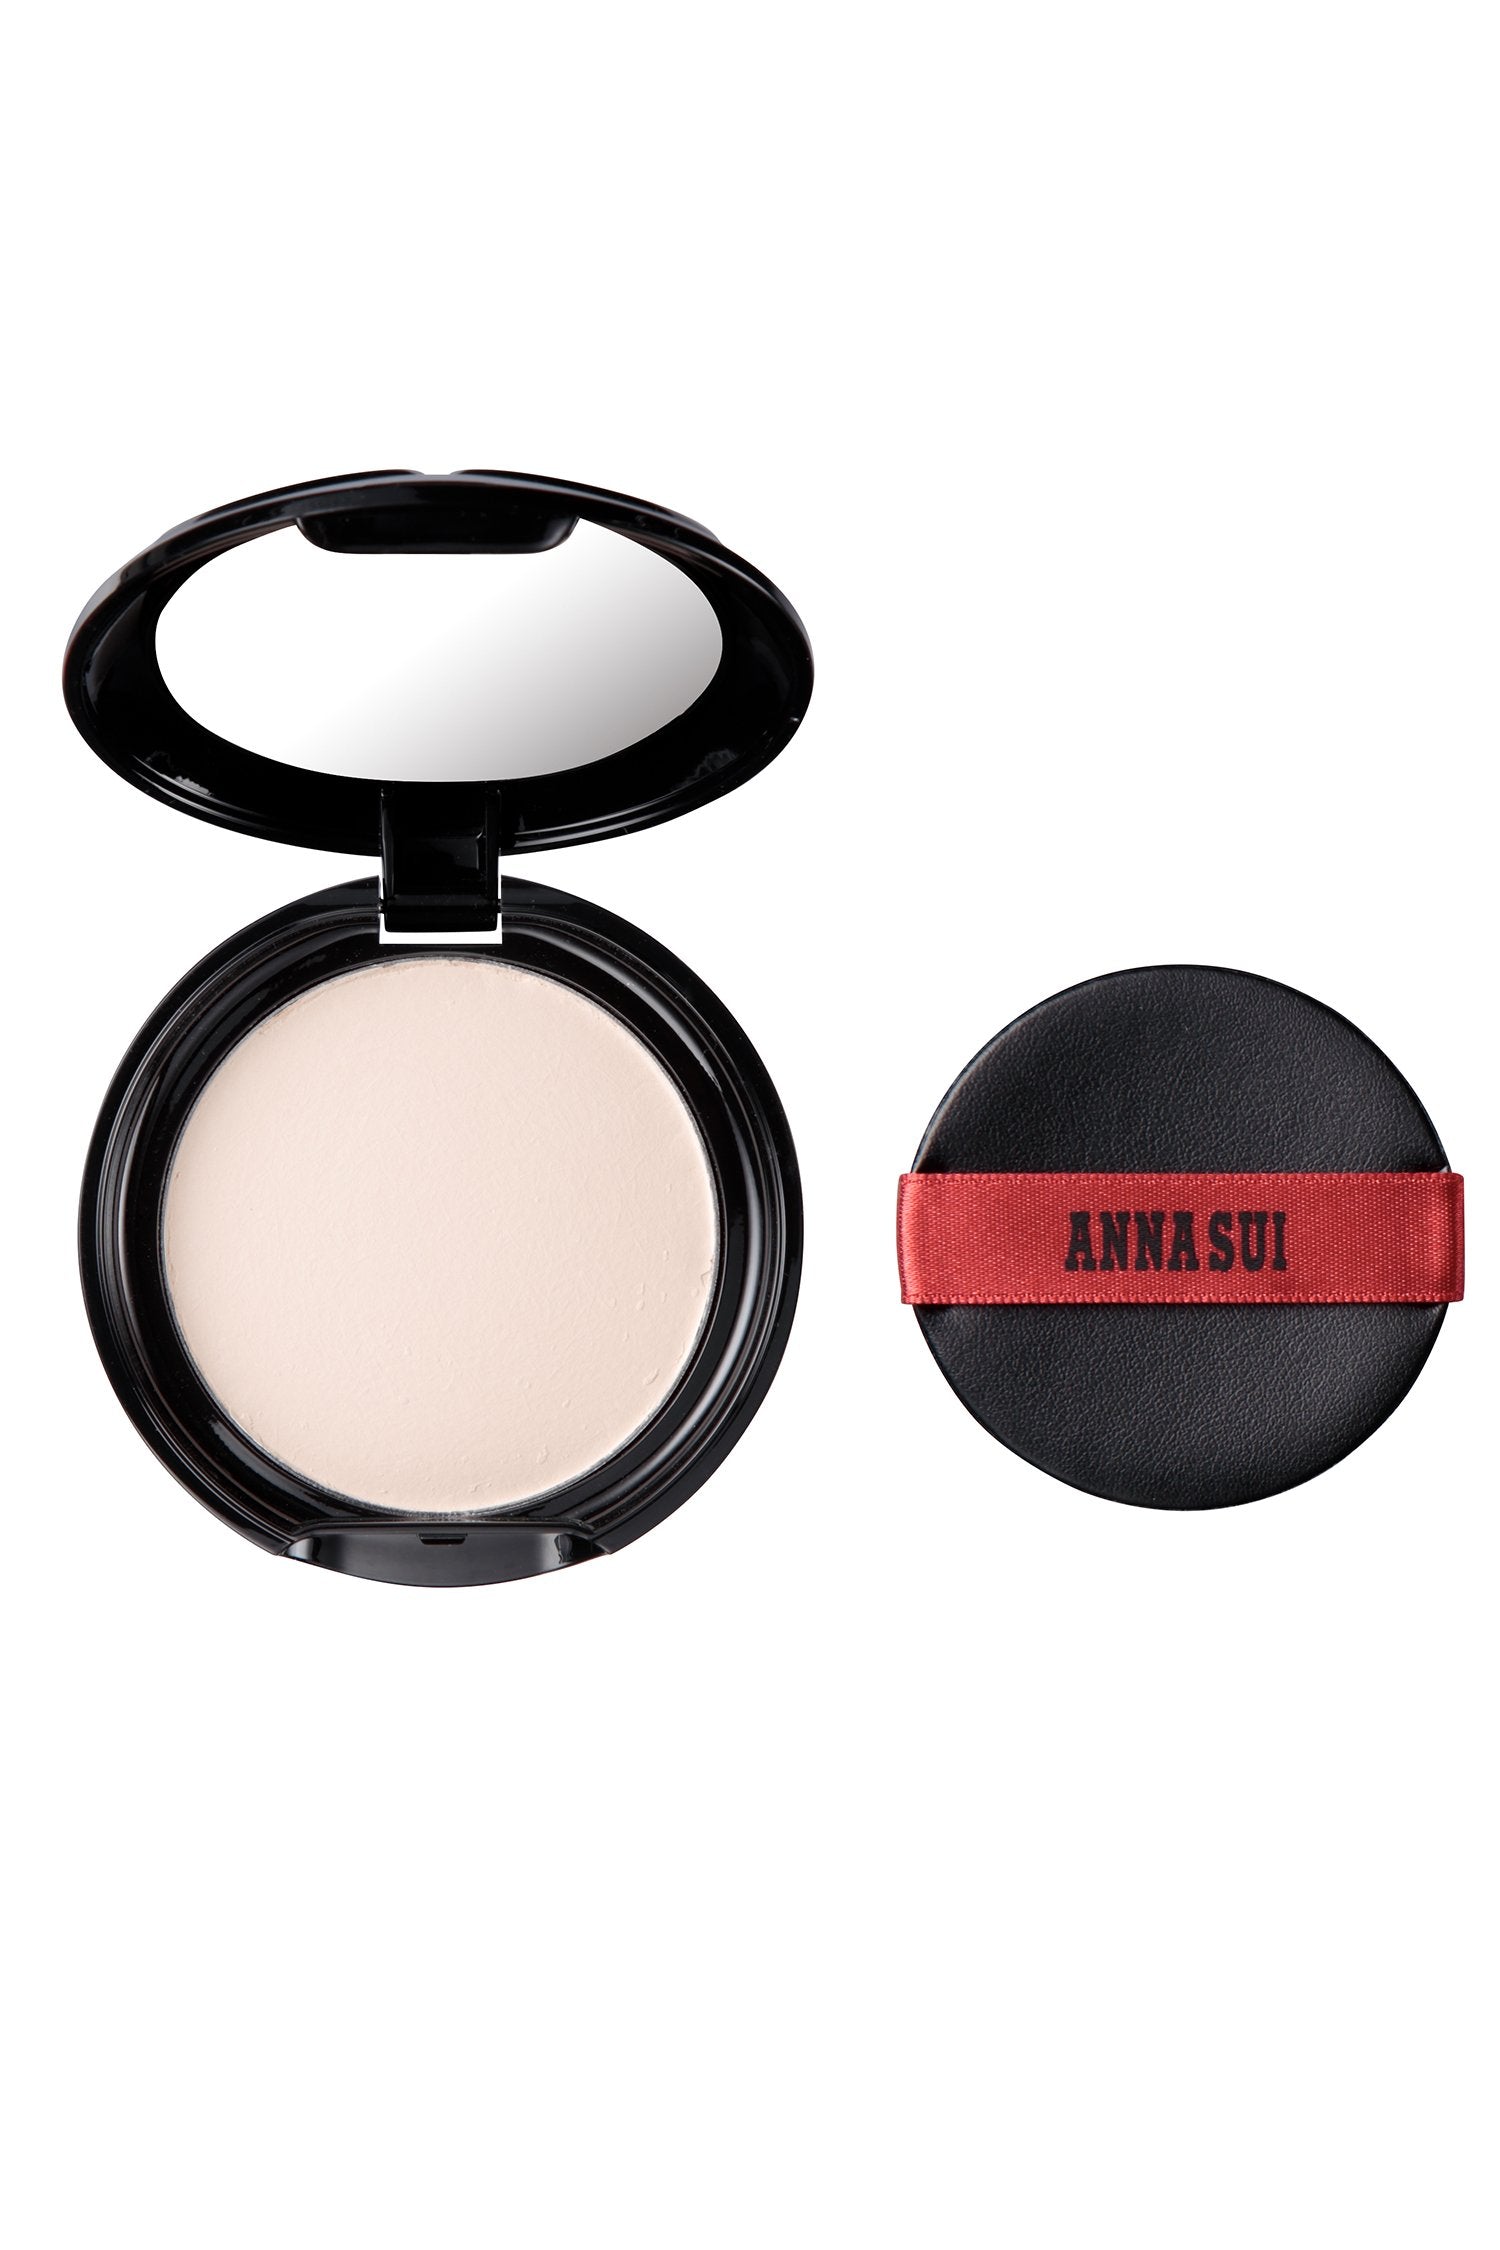 Stylish open powder case, rounded black, with powder mirror and a black pad with red ribbon with black Anna Sui label